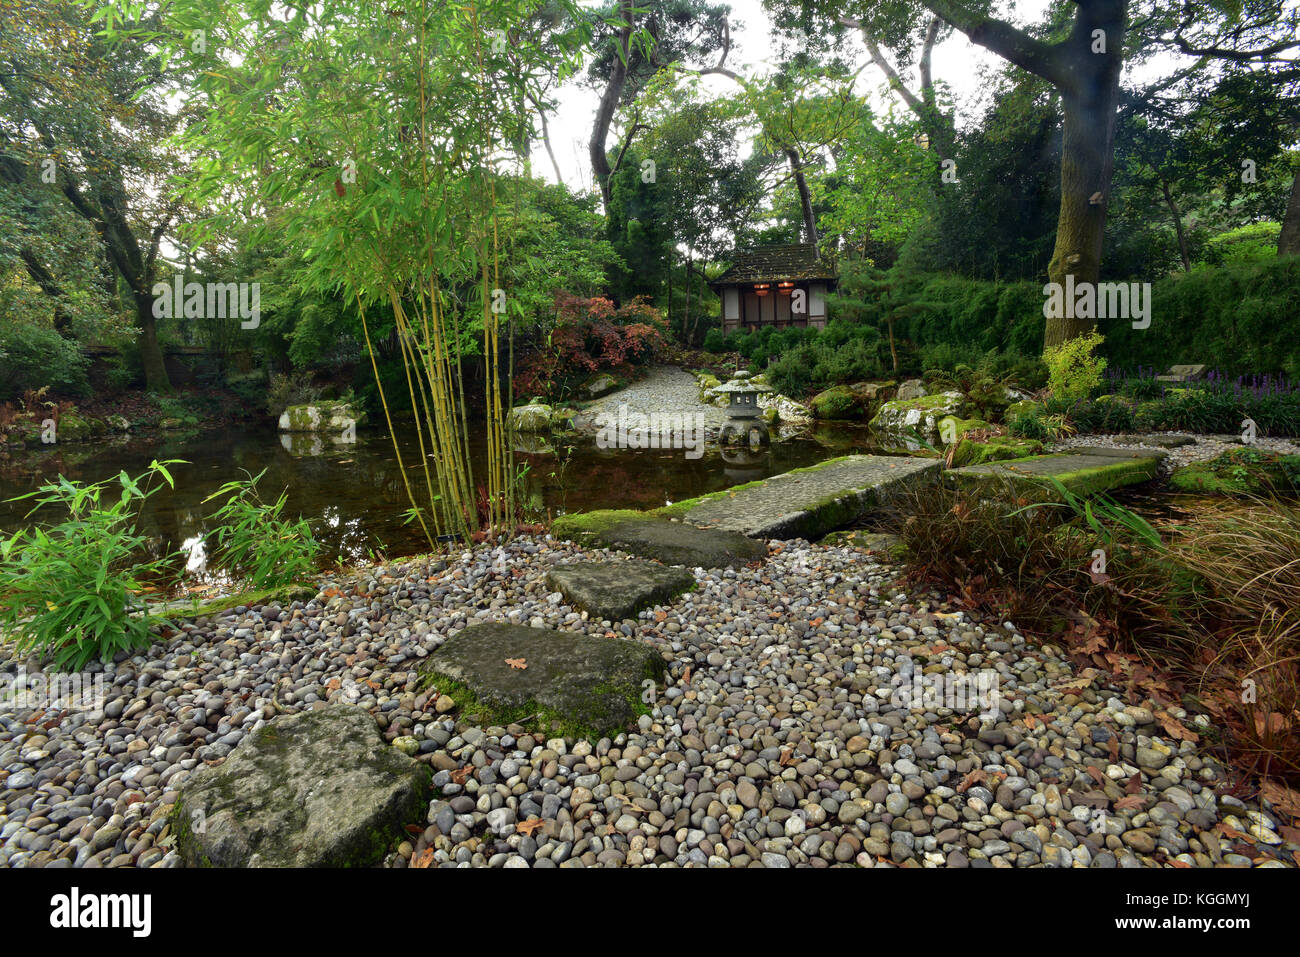 the Japanese garden at Pinetum park near saint Austell in cornwall. Cornish tourist or visitor attractions. Stock Photo